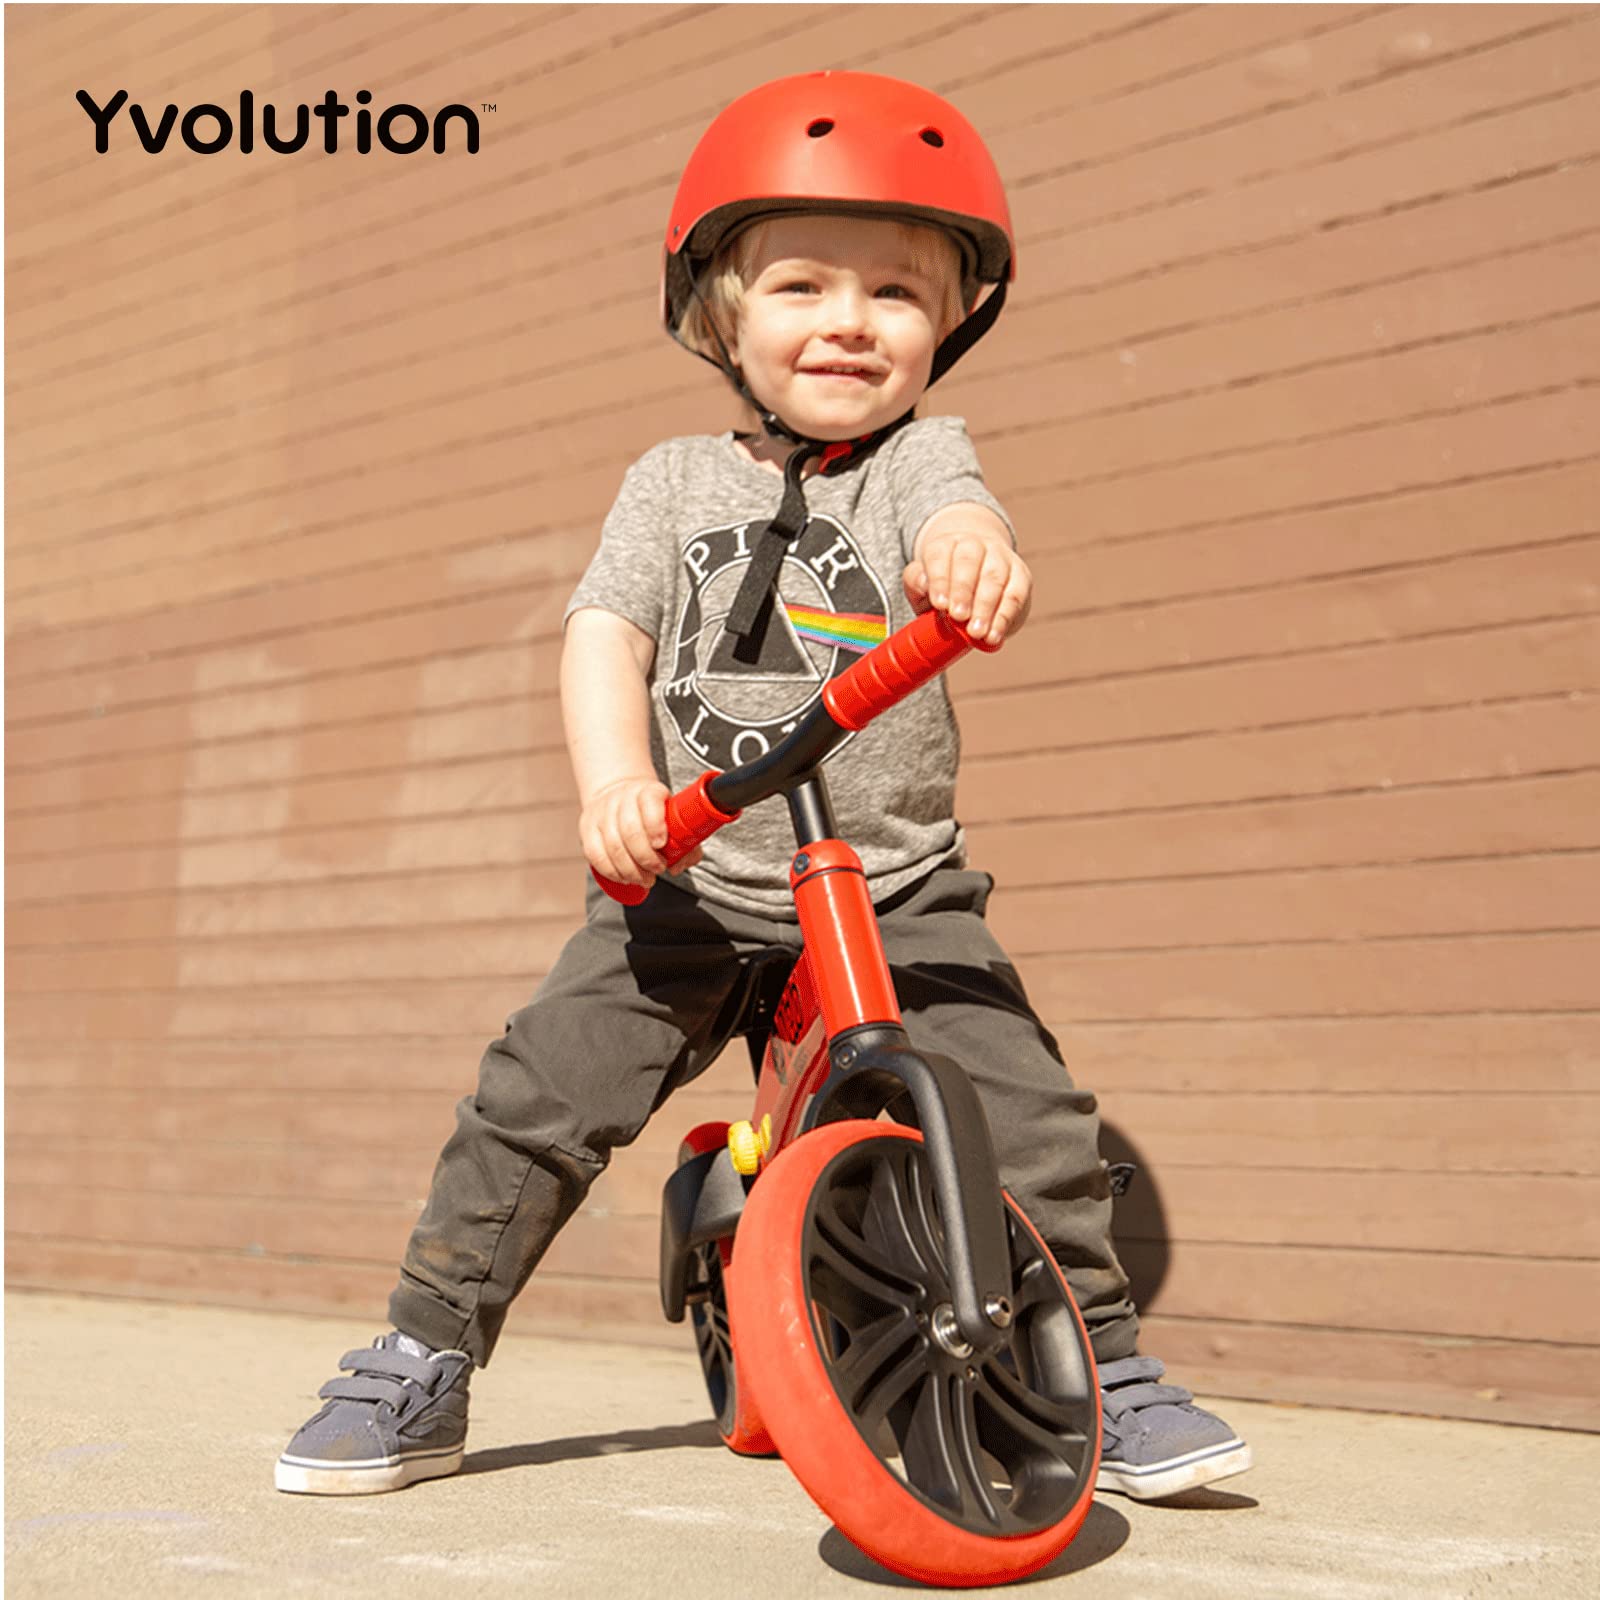 Yvolution Y Velo Junior Toddler Balance Bike 9 Inch Wheel No-Pedal Training Bicycle for Kids Boys Girls Age 18 Months to 2,3,4 Years